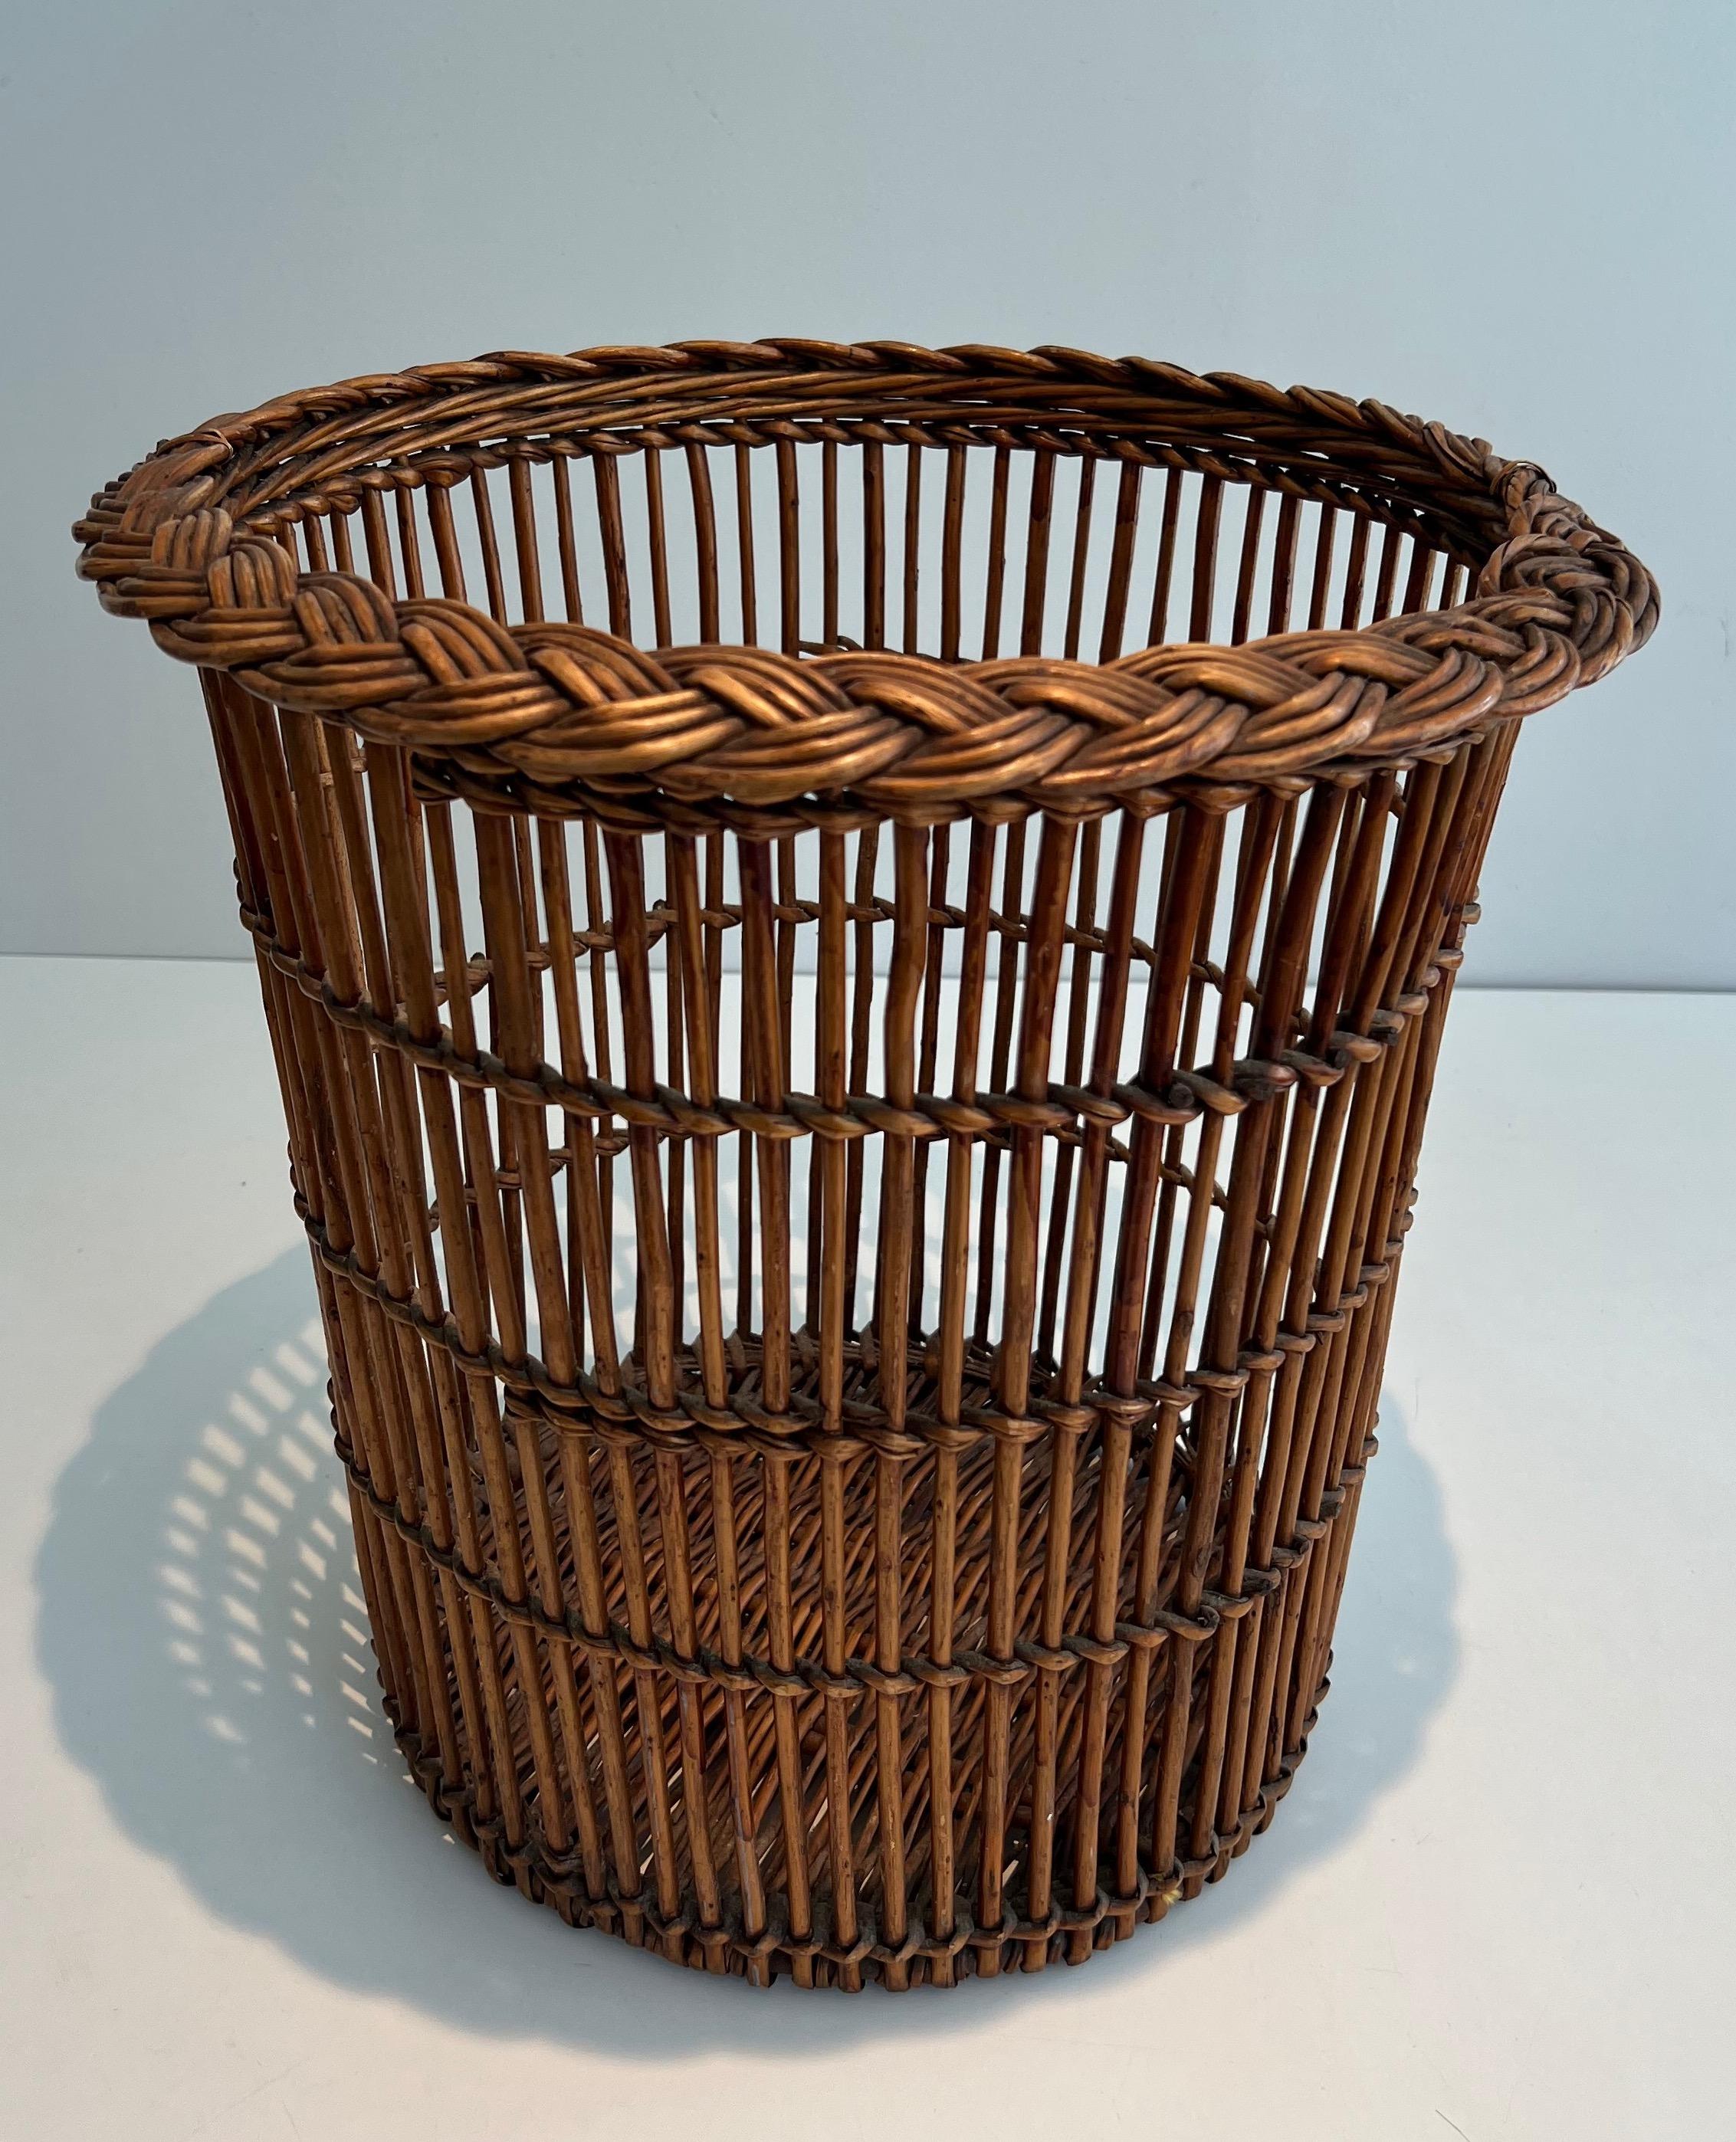 This nice waste paper basket is made of rattan or wicker. This is a fine French work. Circa 1950